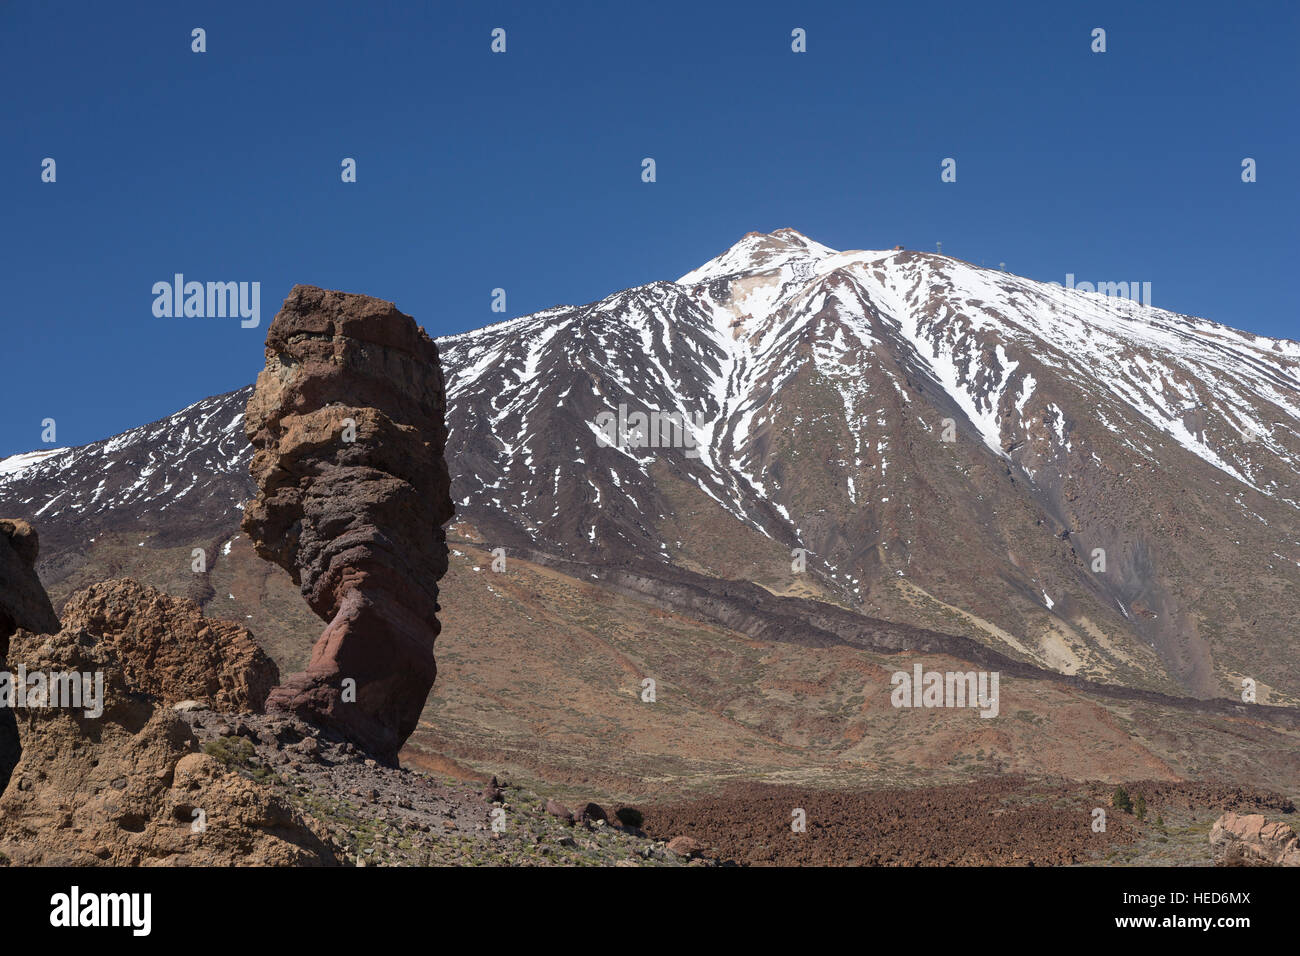 'The Finger of God' a volcanic rock formation near Mount Teide, Tenerife, Canary Islands, Spain Stock Photo